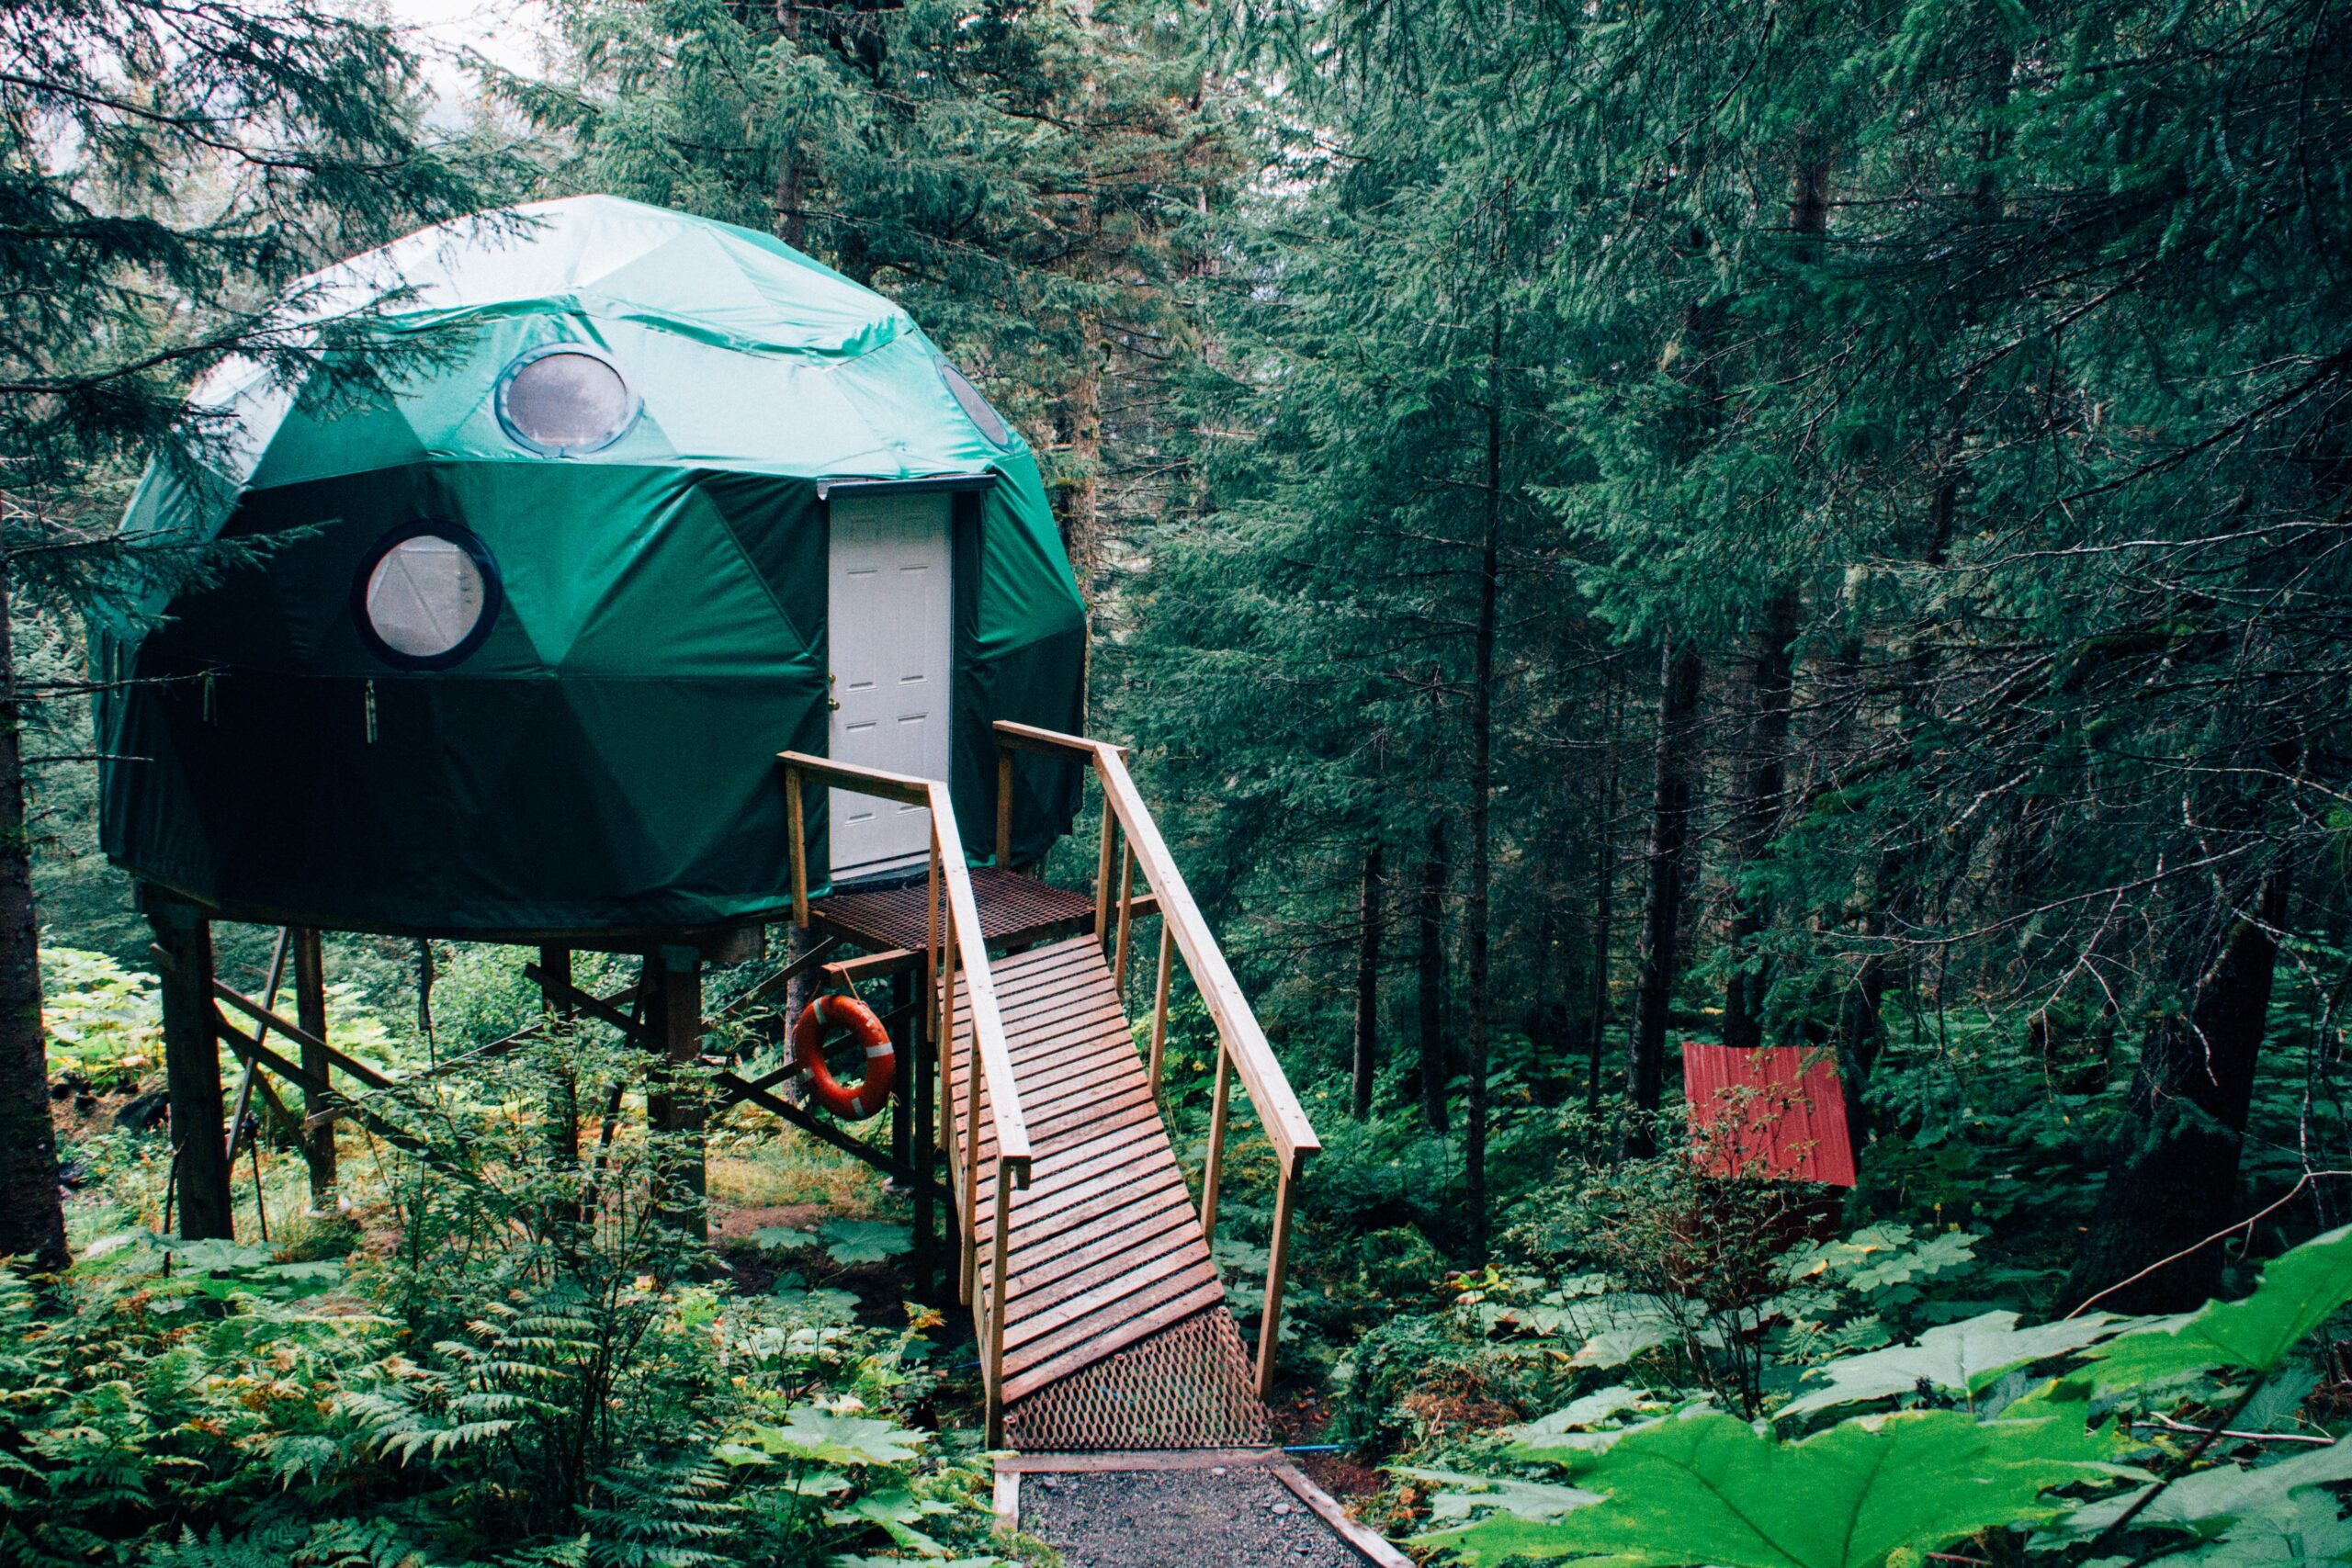 Disocover your next destination with these unusual Airbnbs worldwide